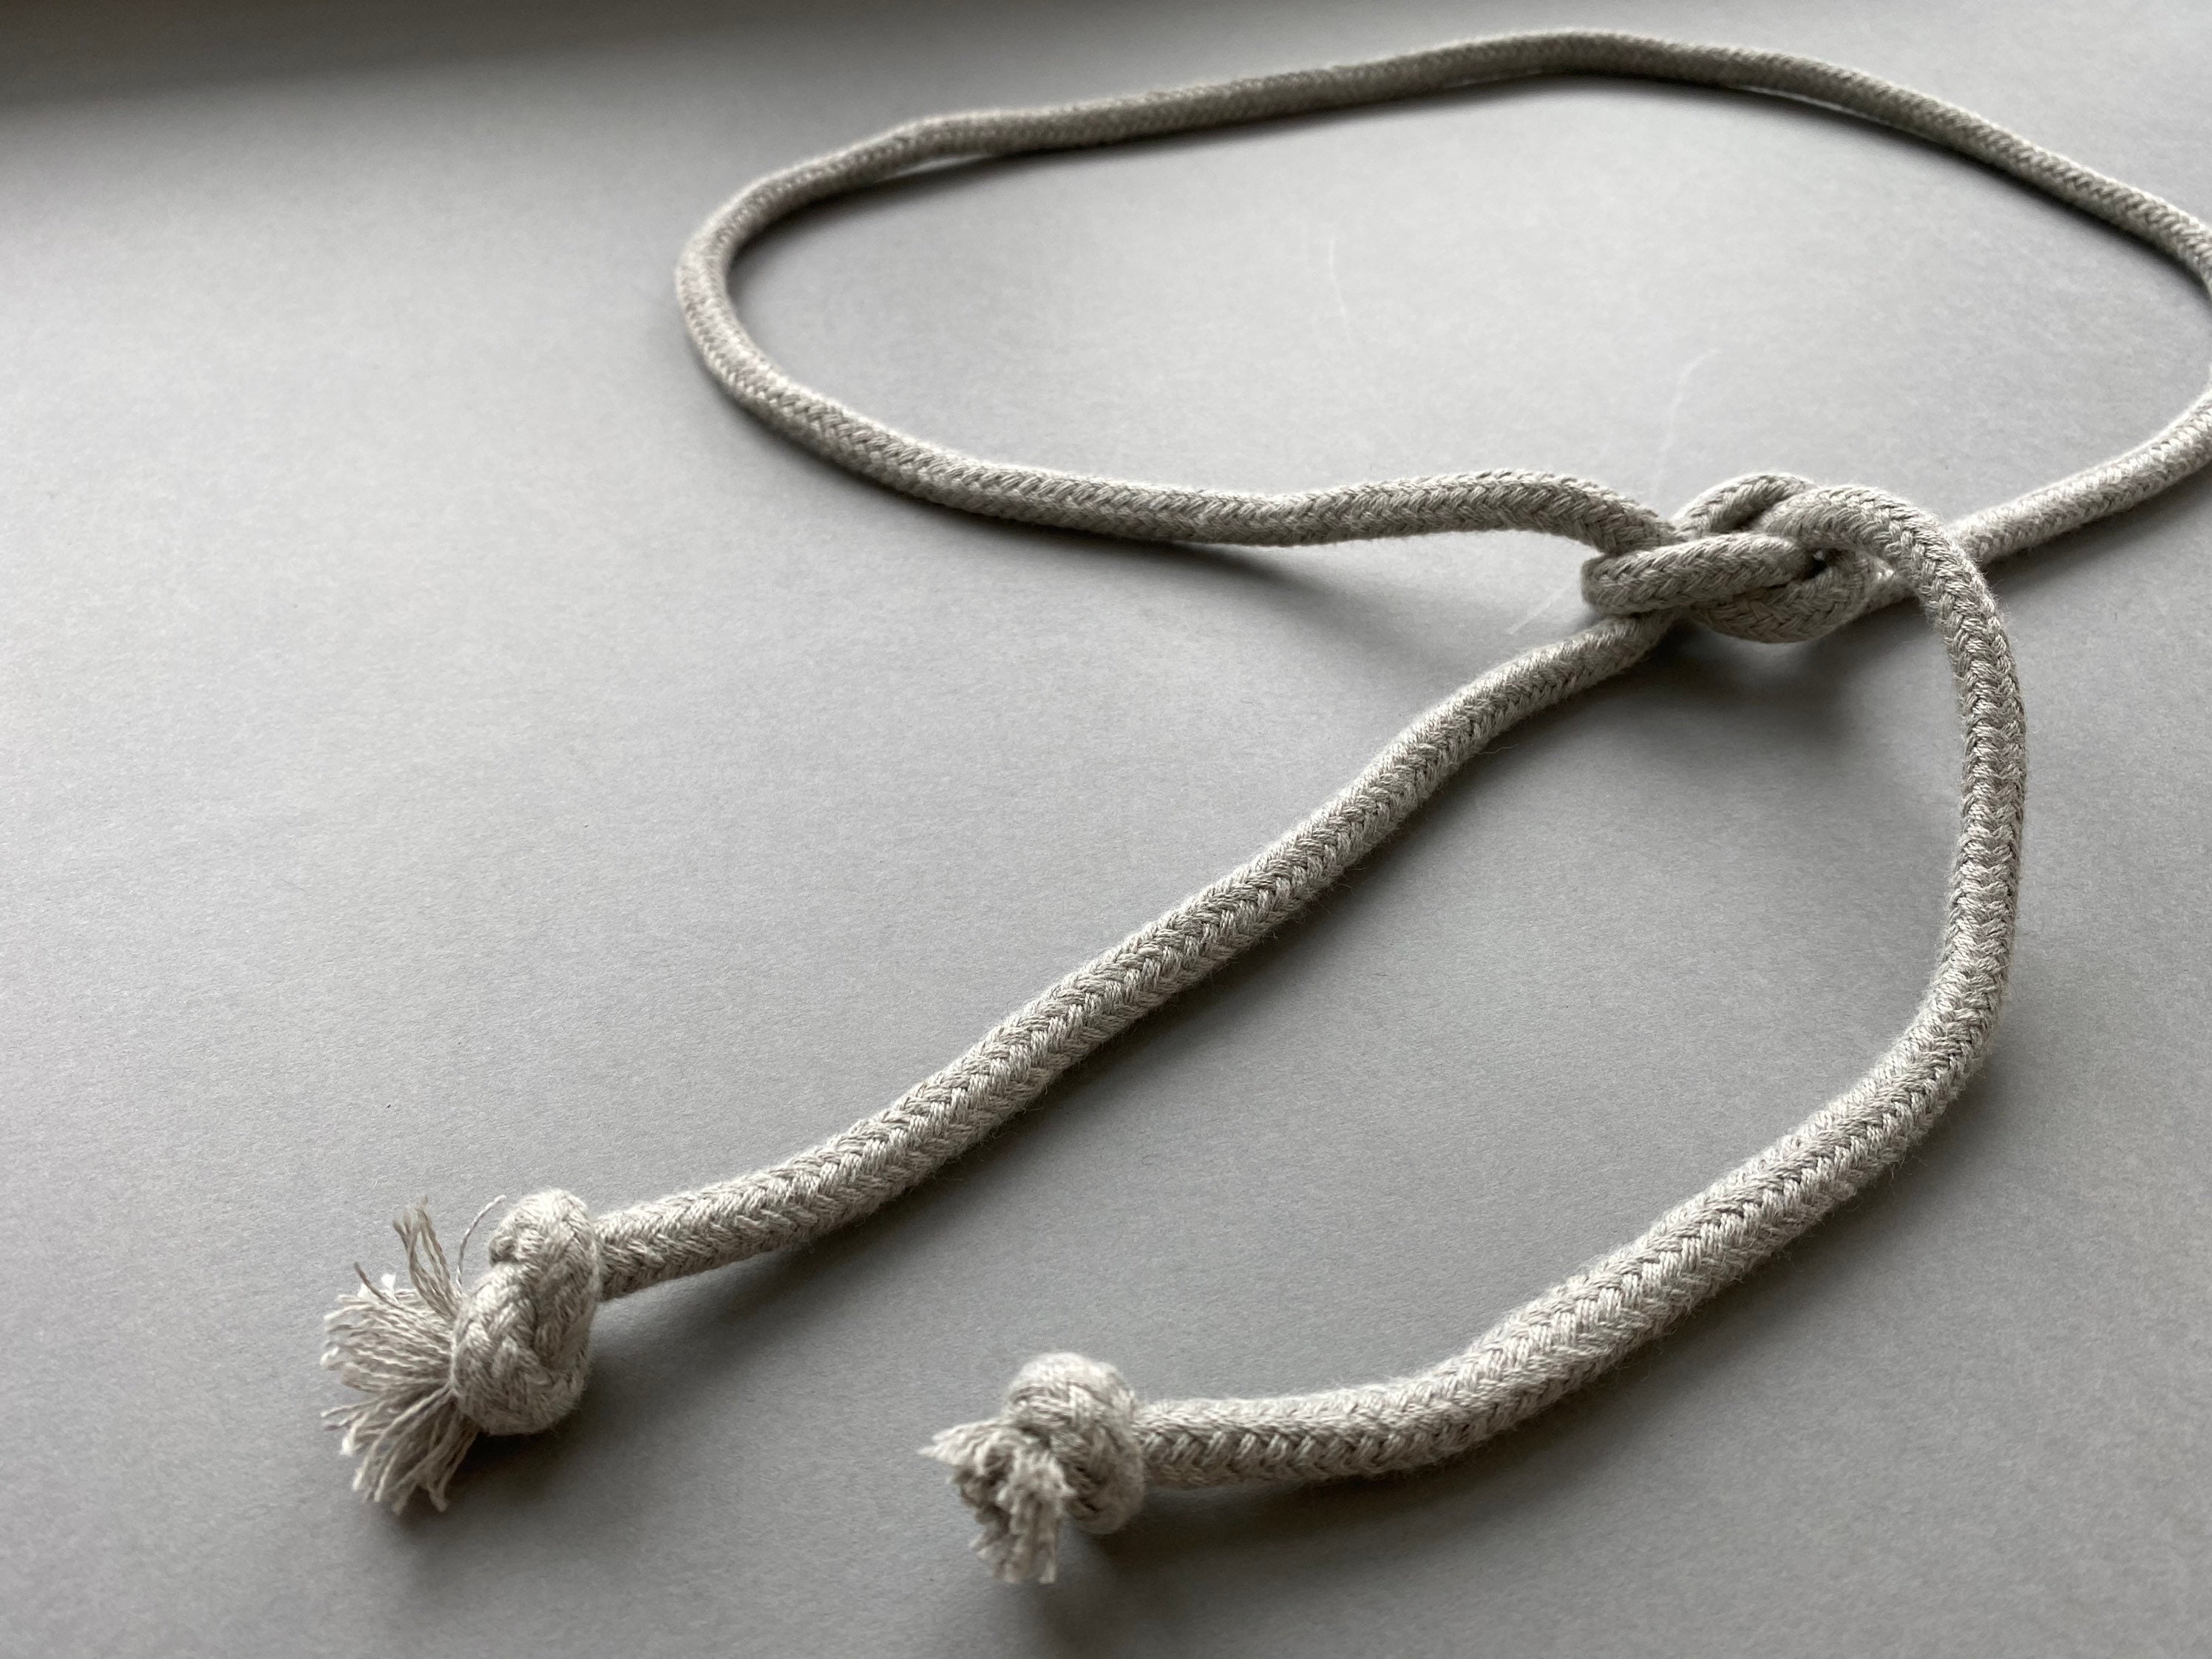 Nautical Rope Belt with Whipping Knot Ends - 1/2 Diameter